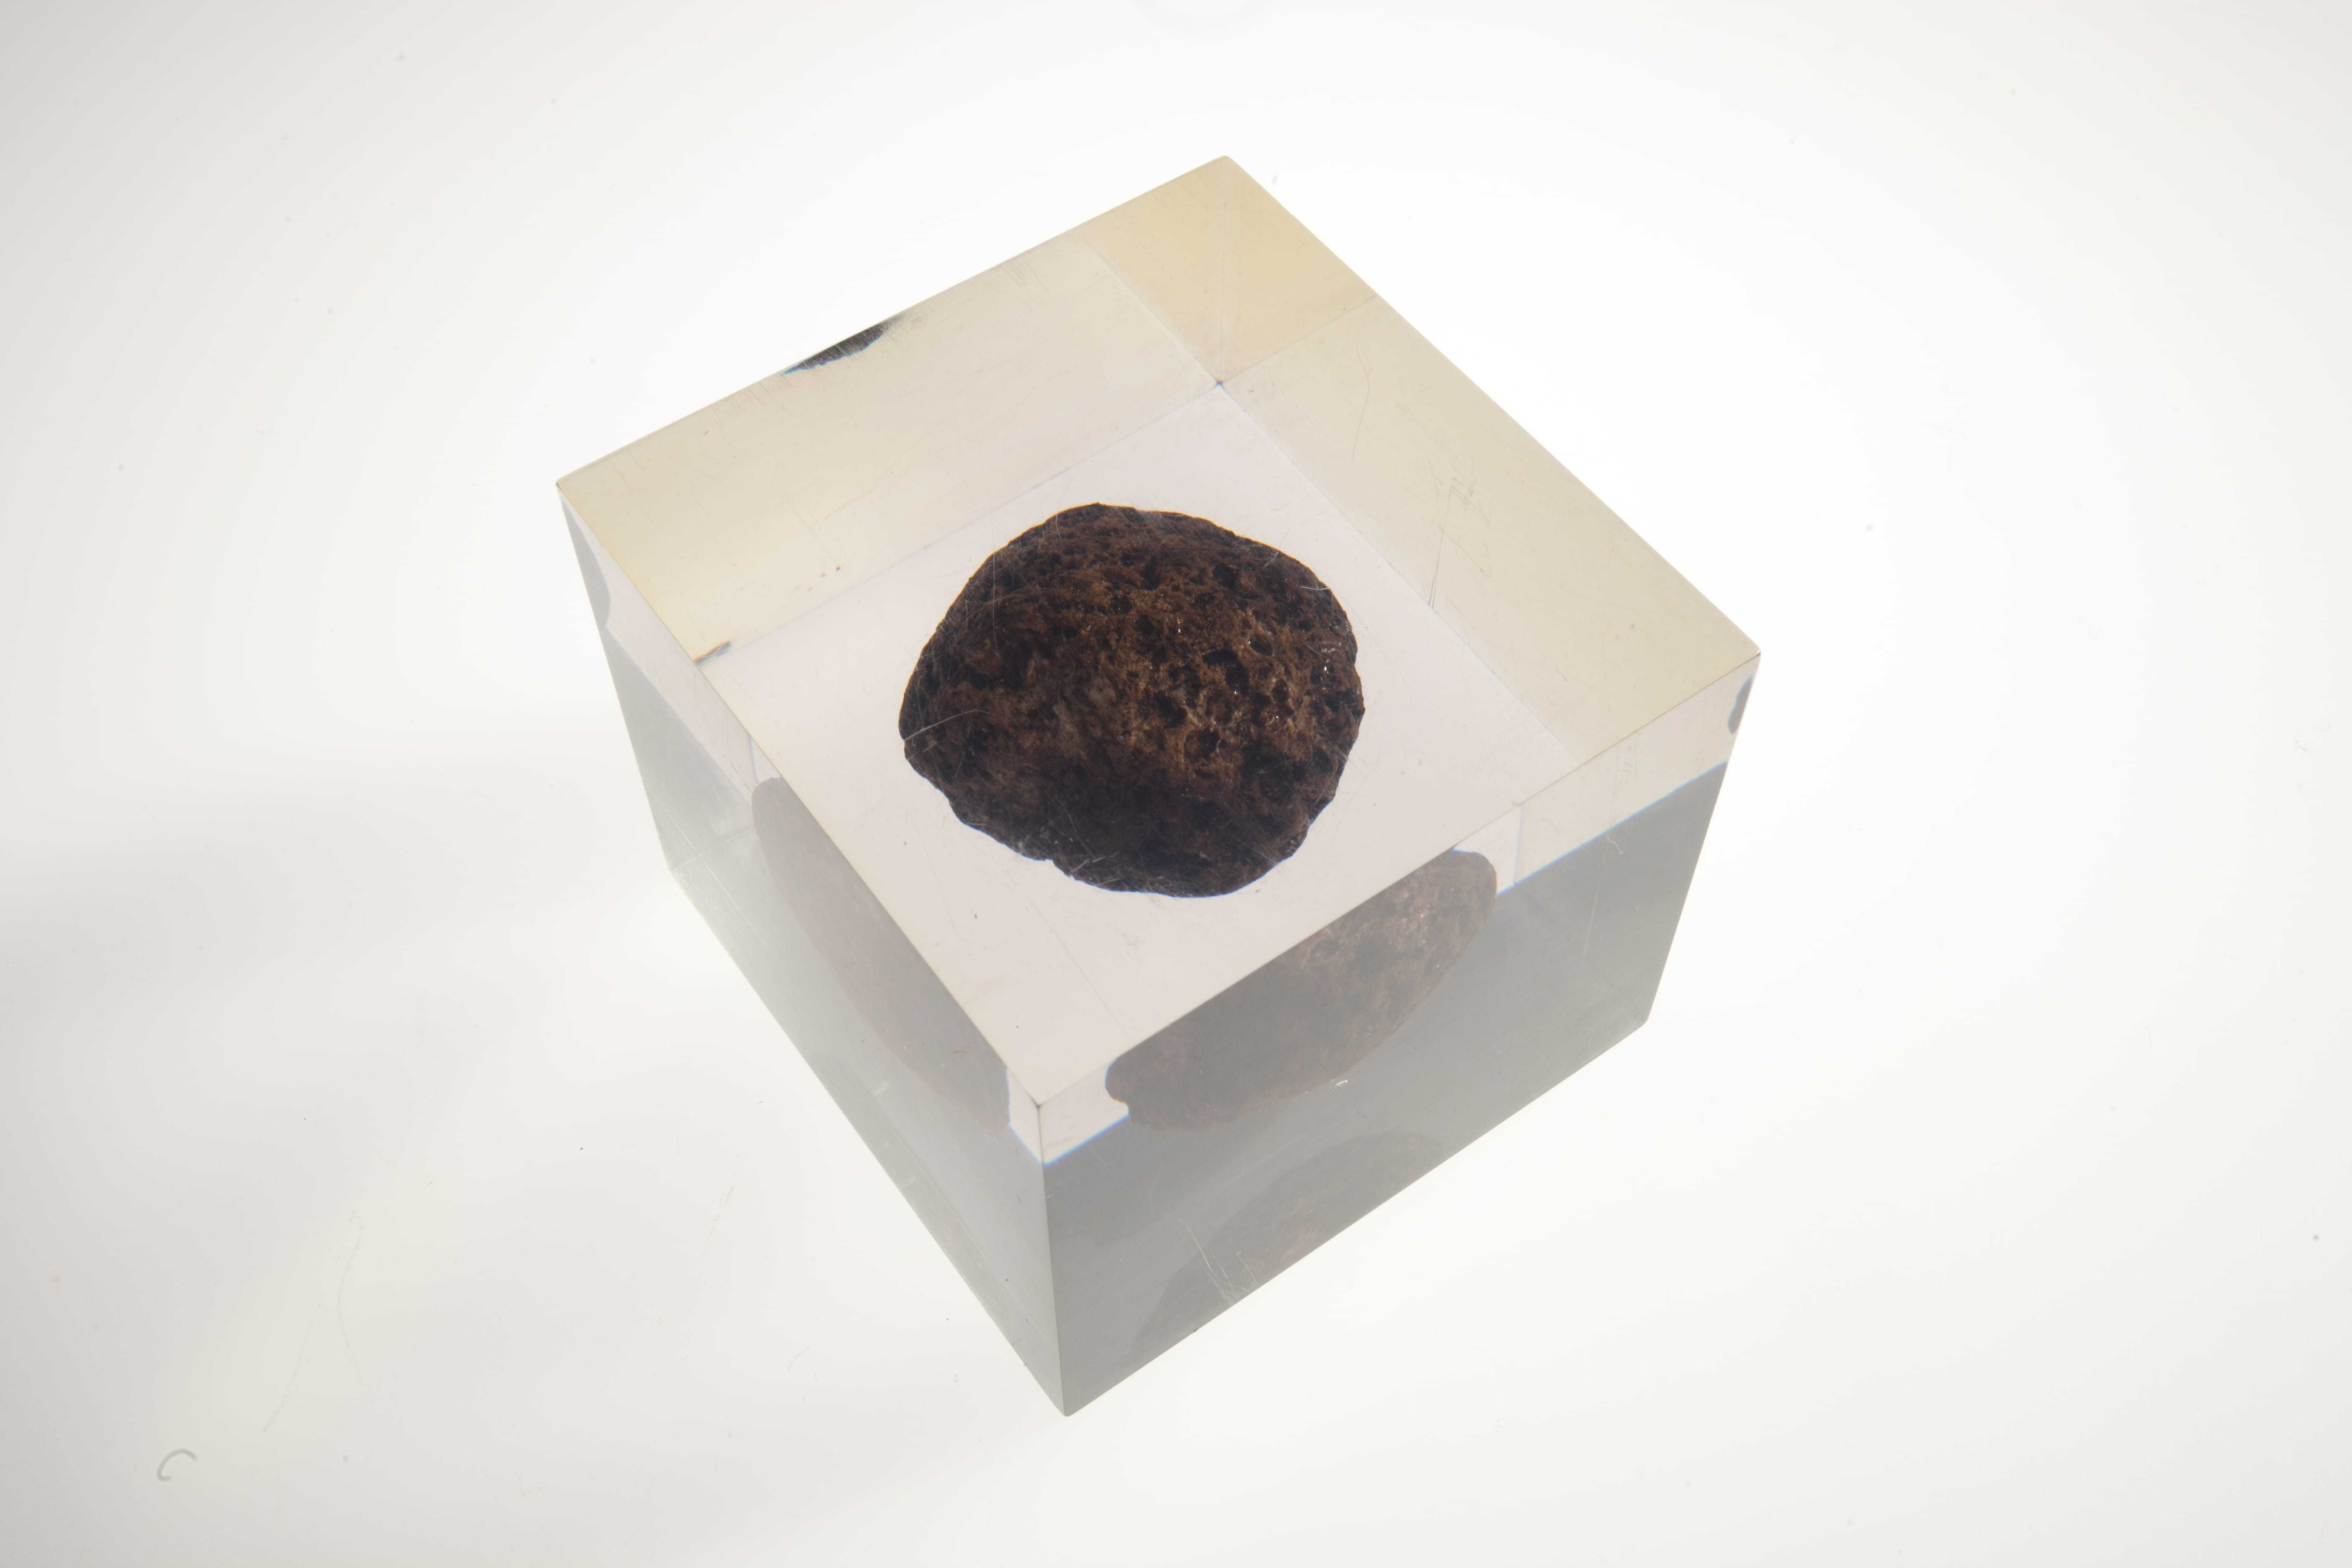 A brownish lump of Manganese encased in a glass block.